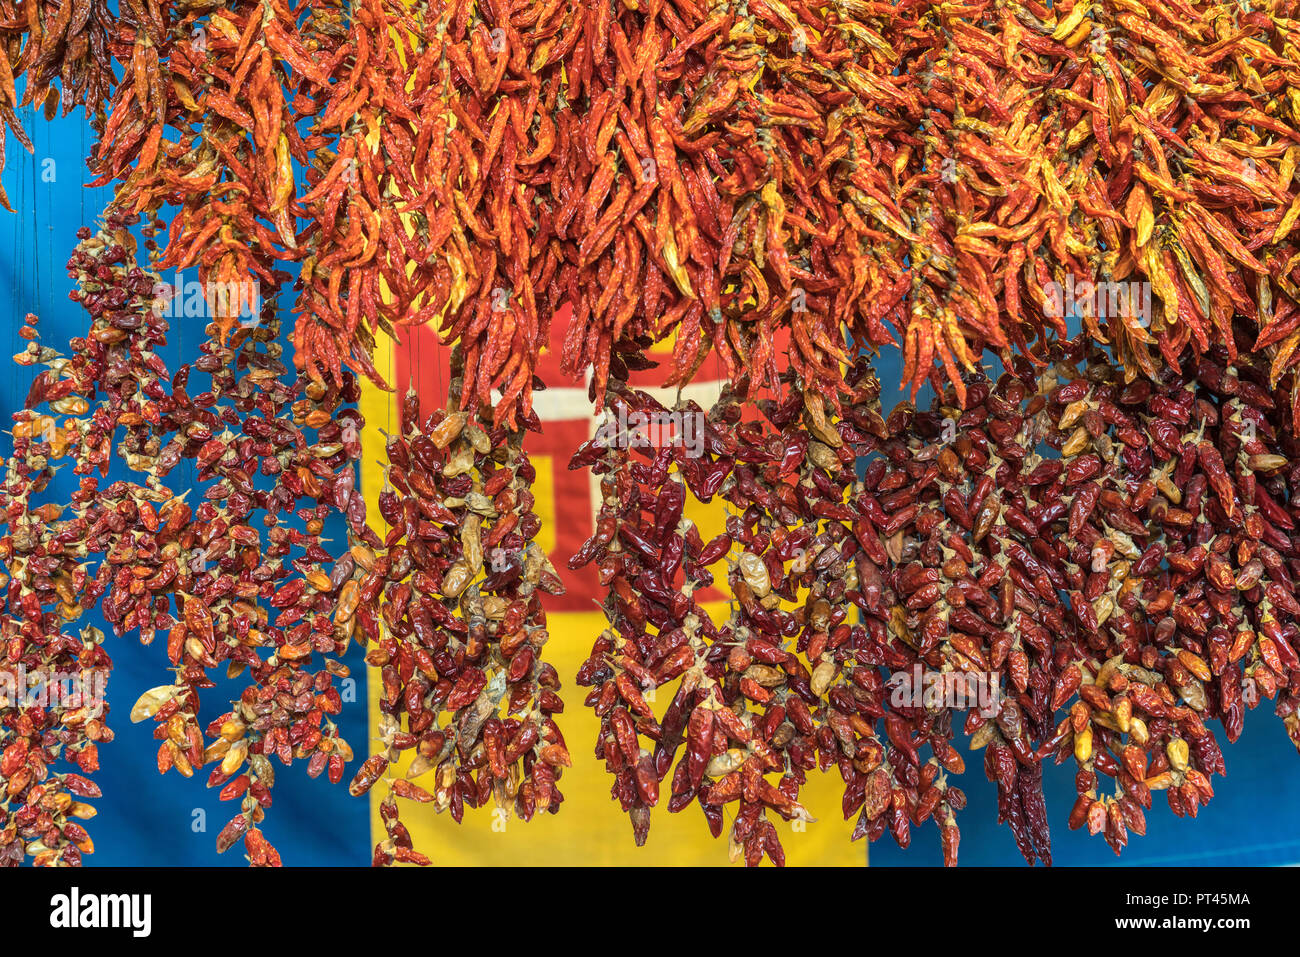 Dried chili peppers and the flag of Madeira in the background at Mercado dos Lavradores - Farmers' Market, Funchal, Madeira region, Portugal, Stock Photo